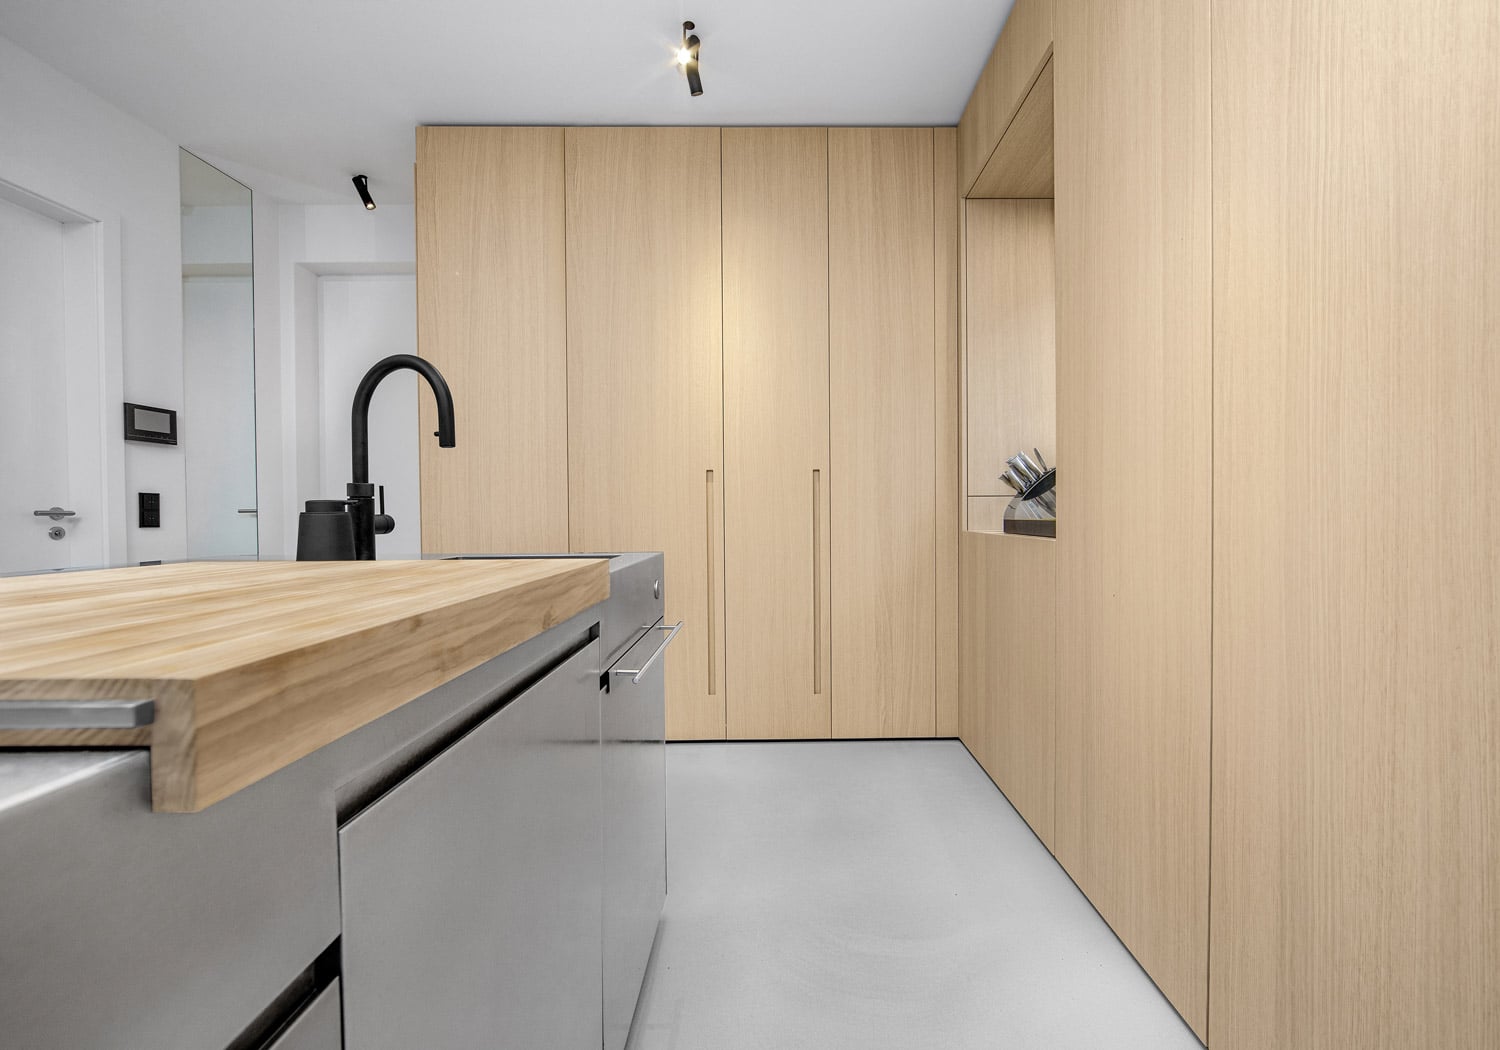 Tall unit with Oslo recessed vertical handles combining a pocket door and bifolding pocket doors to accommodate the non-standard dimensions of the space. 